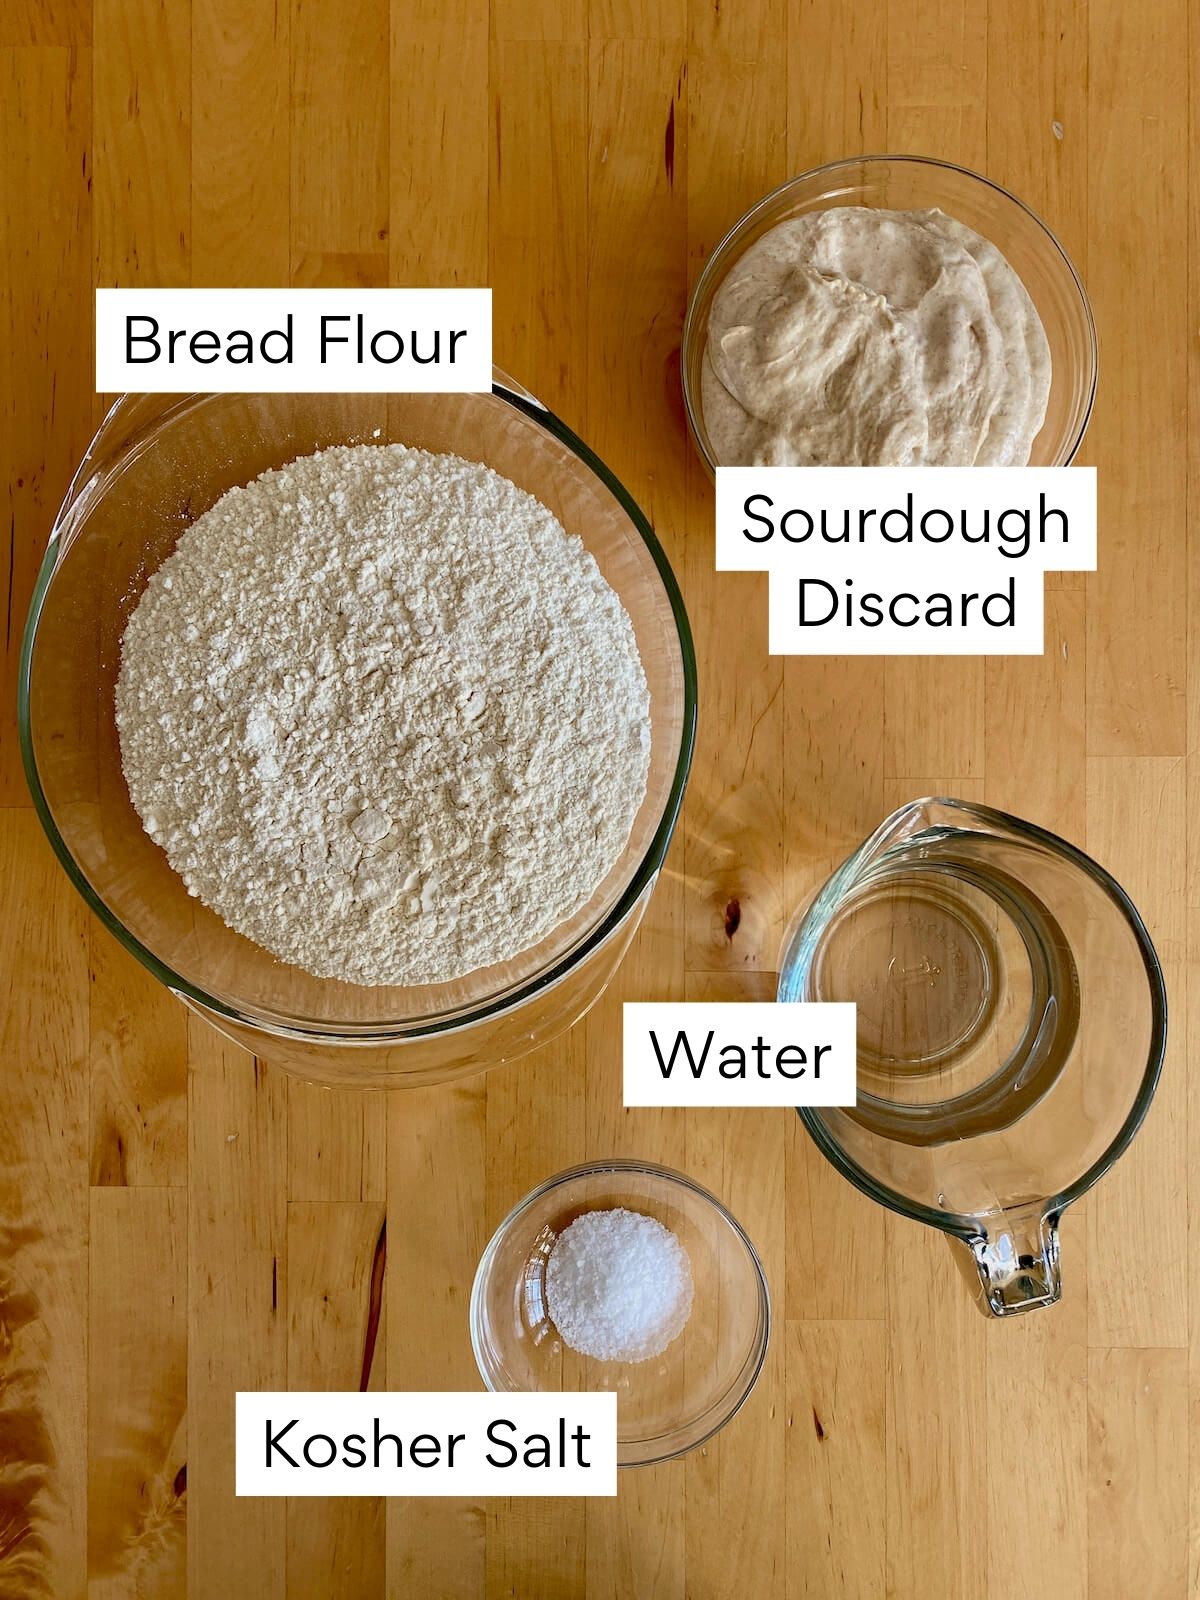 The ingredients to make sourdough discard pizza dough on a butcher block countertop. Each ingredient is labeled with text. They include bread flour, sourdough discard, water, and kosher salt.